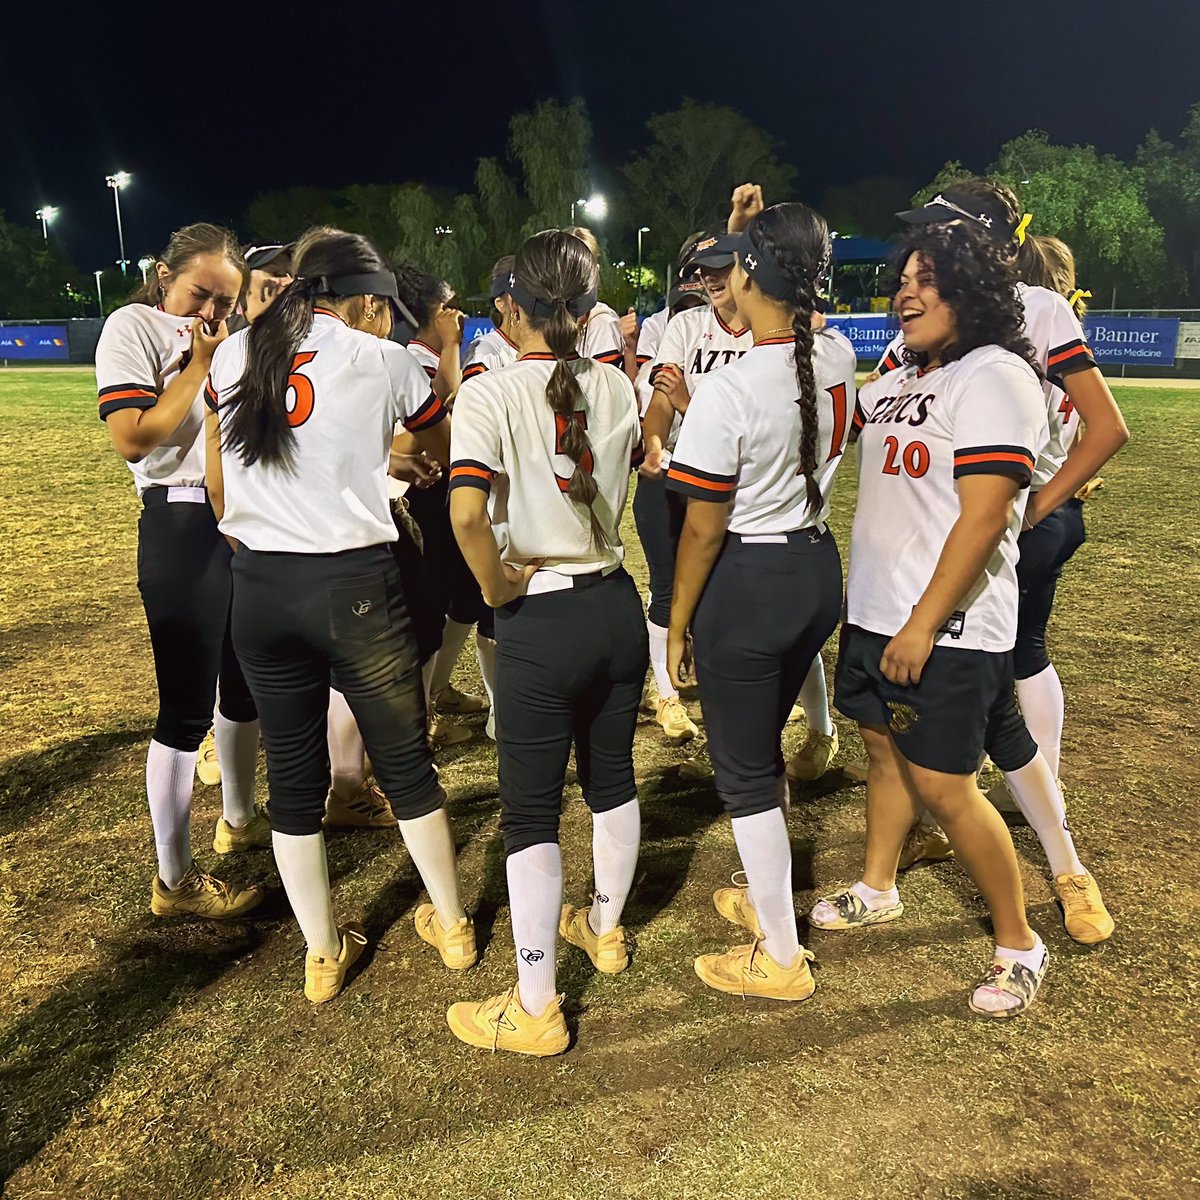 ONE LAST HUDDLE 🥺😭 WHAT A SEASON! THIS TEAM 🧡💛 An emotional and tough loss, but literally fought until the last out of the game. These girls should be NOTHING BUT PROUD of their playoff run, as may people counted this phenomenal #16 seed out! HOLD YOUR HEADS UP HIGH!